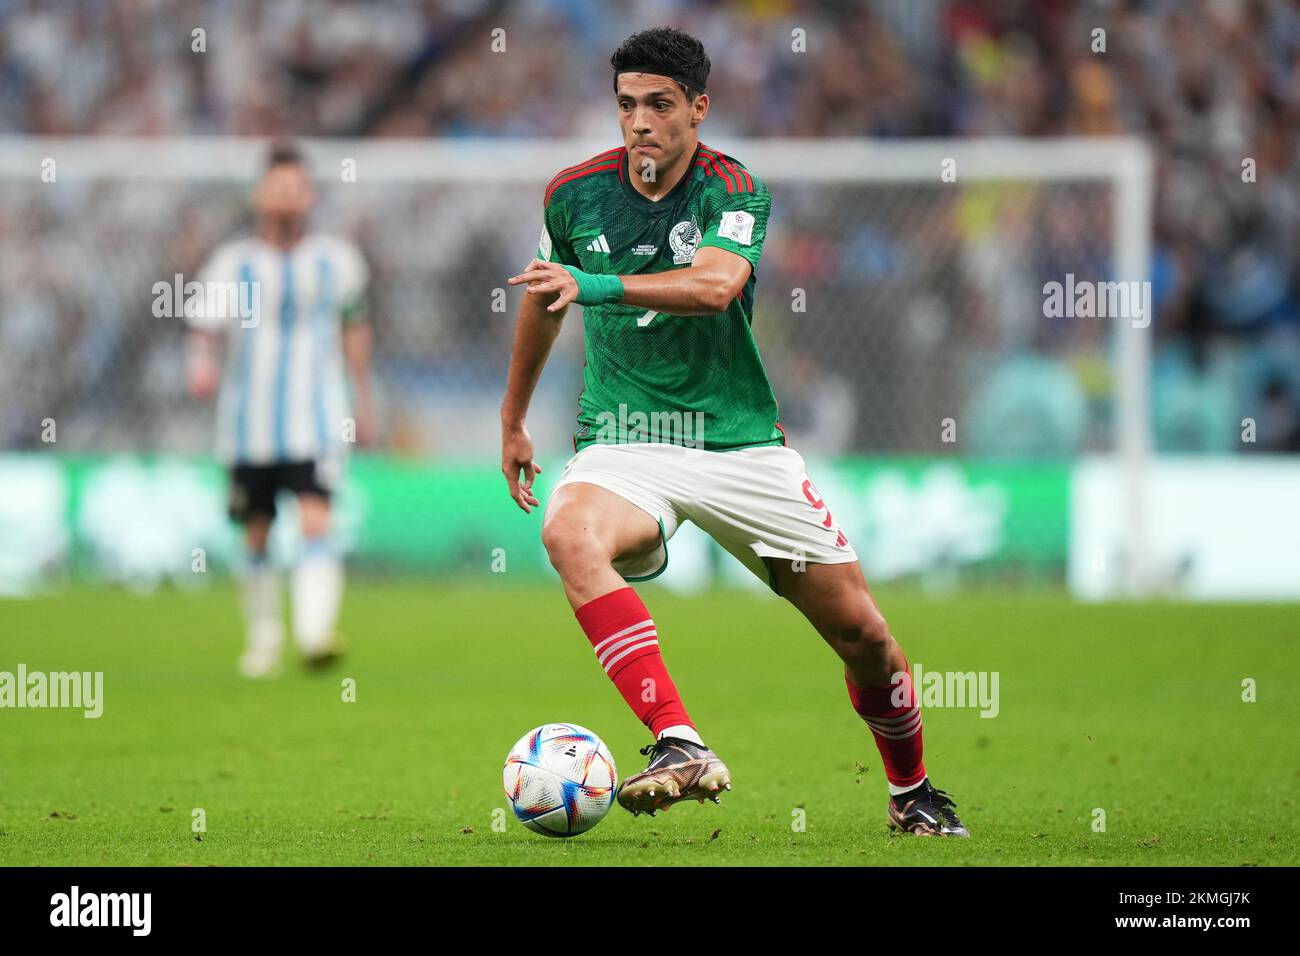 Raul Jimenez of Mexico during the FIFA World Cup Qatar 2022 match, Group C, between Argentina and Mexico played at Lusail Stadium on Nov 26, 2022 in Lusail, Qatar. (Photo by Bagu Blanco / PRESSIN) Credit: PRESSINPHOTO SPORTS AGENCY/Alamy Live News Stock Photo